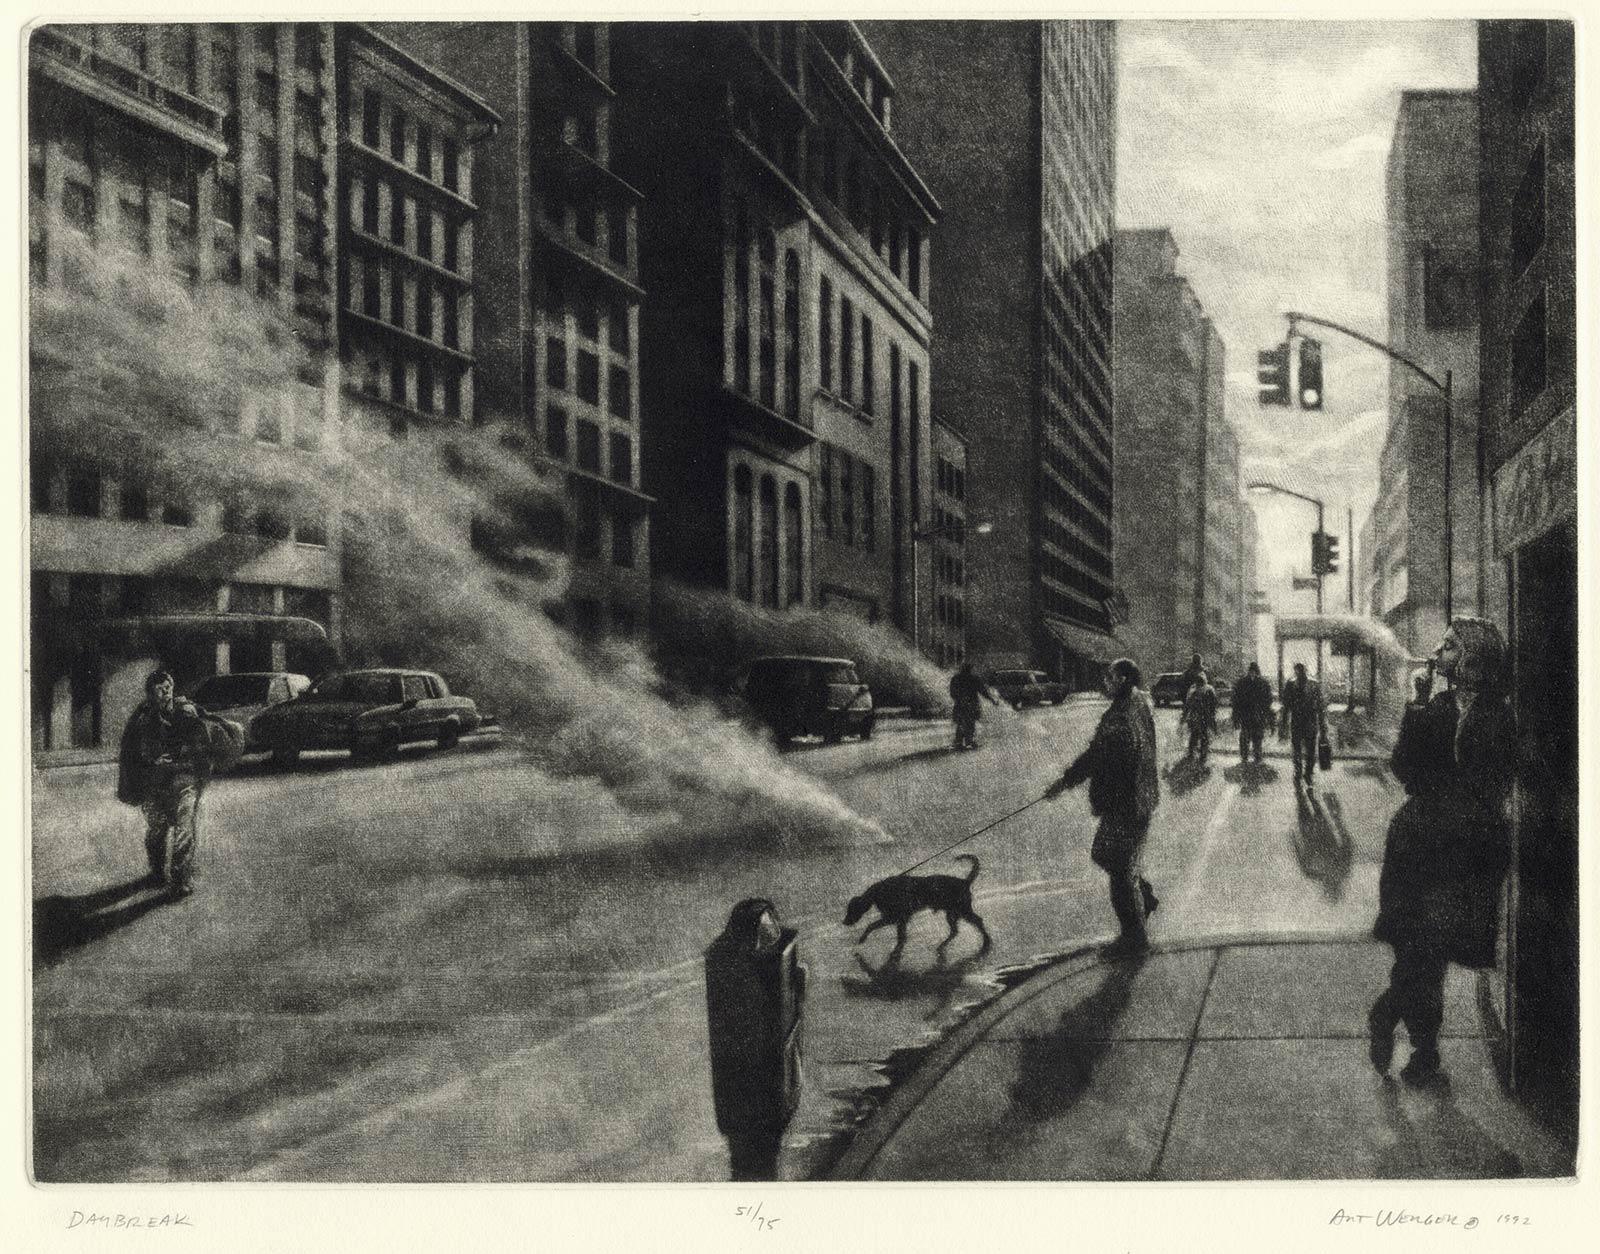 It's morning in America -- New York City to be precise. Steam spews from the vents in the street as a man walks his dog and a stylish woman leans suggestively against a building smoking a cigarette.  Is she getting an early start for work or perhaps